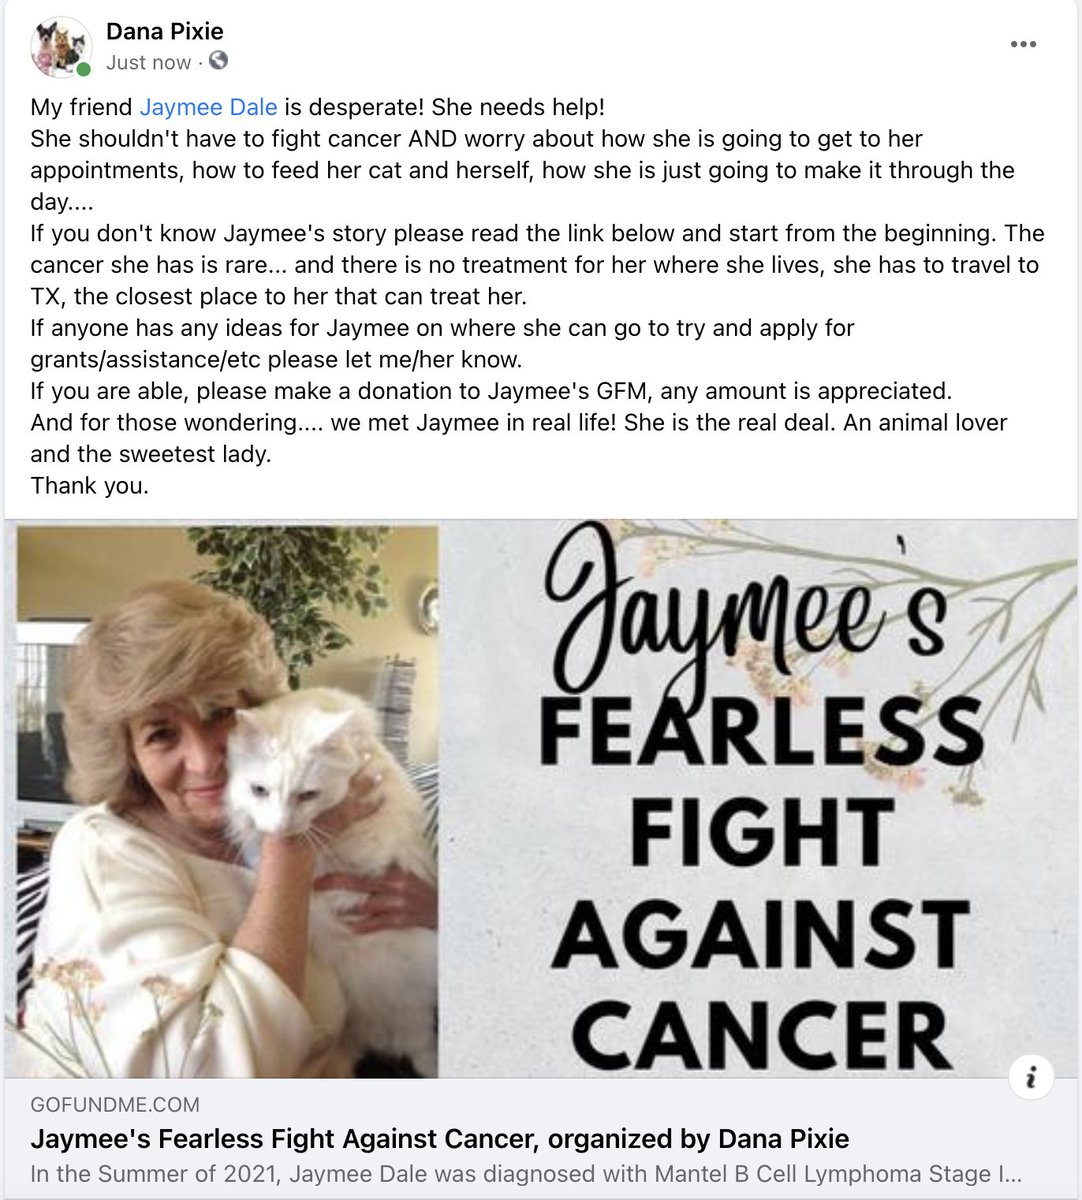 Please read NEW update! Jaymee is in dire need of our help! Needs help with food/supplies/meds for Vonnie and herself. Please help if you are able. Send good thoughts ASAP! #pawcircle gofund.me/36bb0133 @cybercat919 RT!